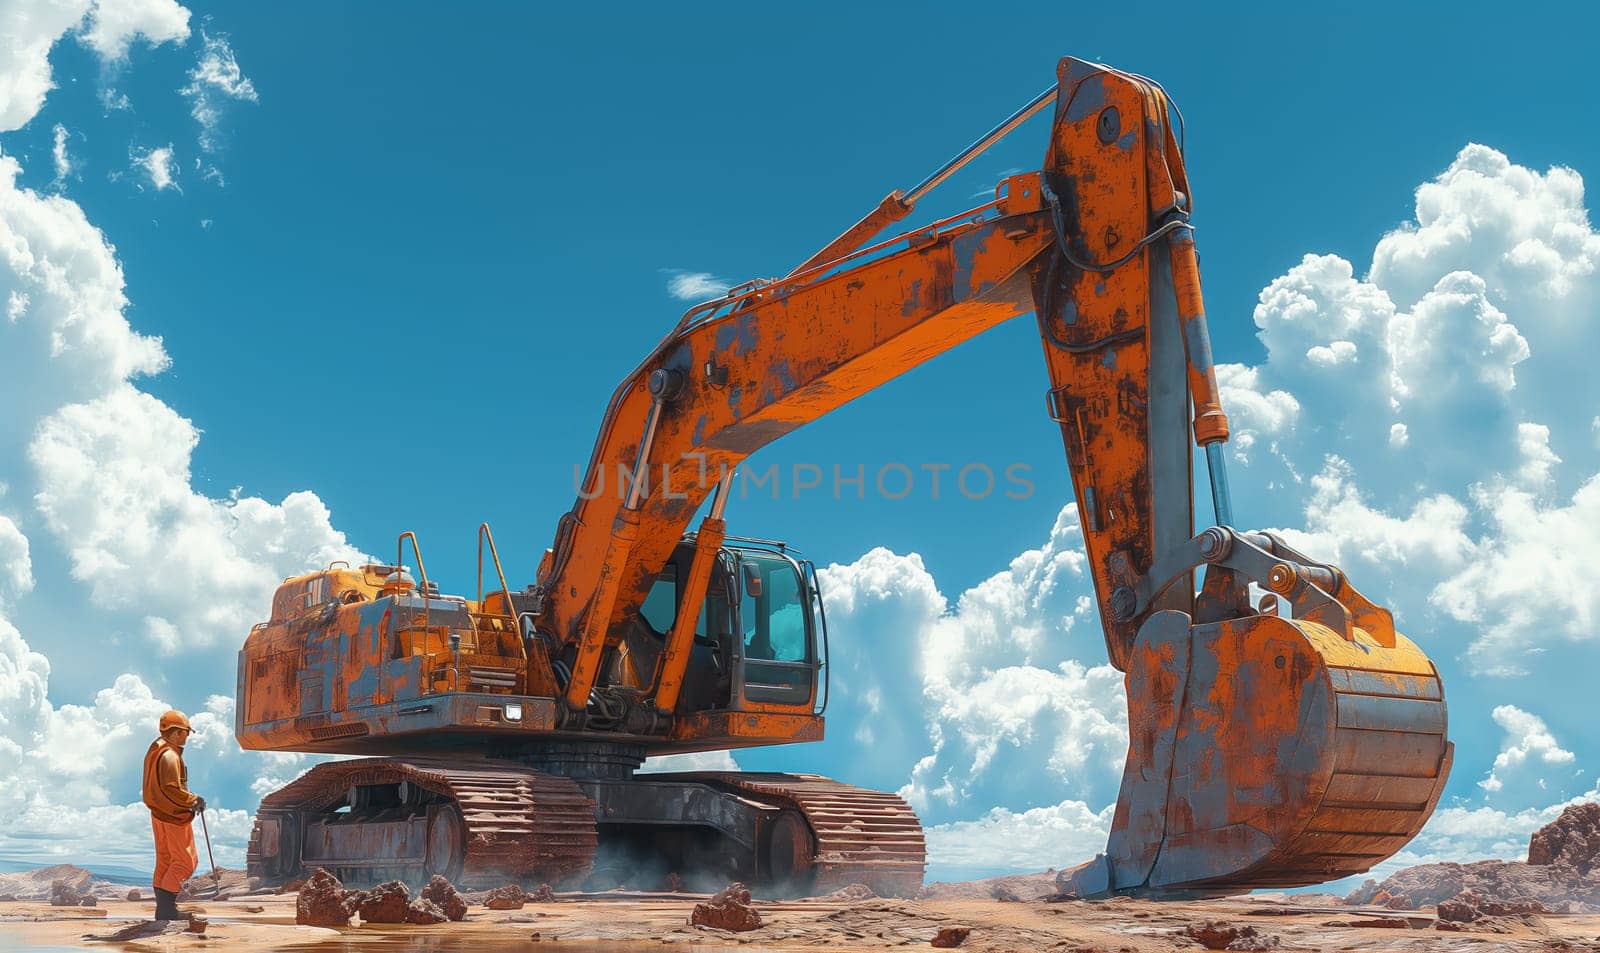 A man standing next to an orange excavator at a construction site.